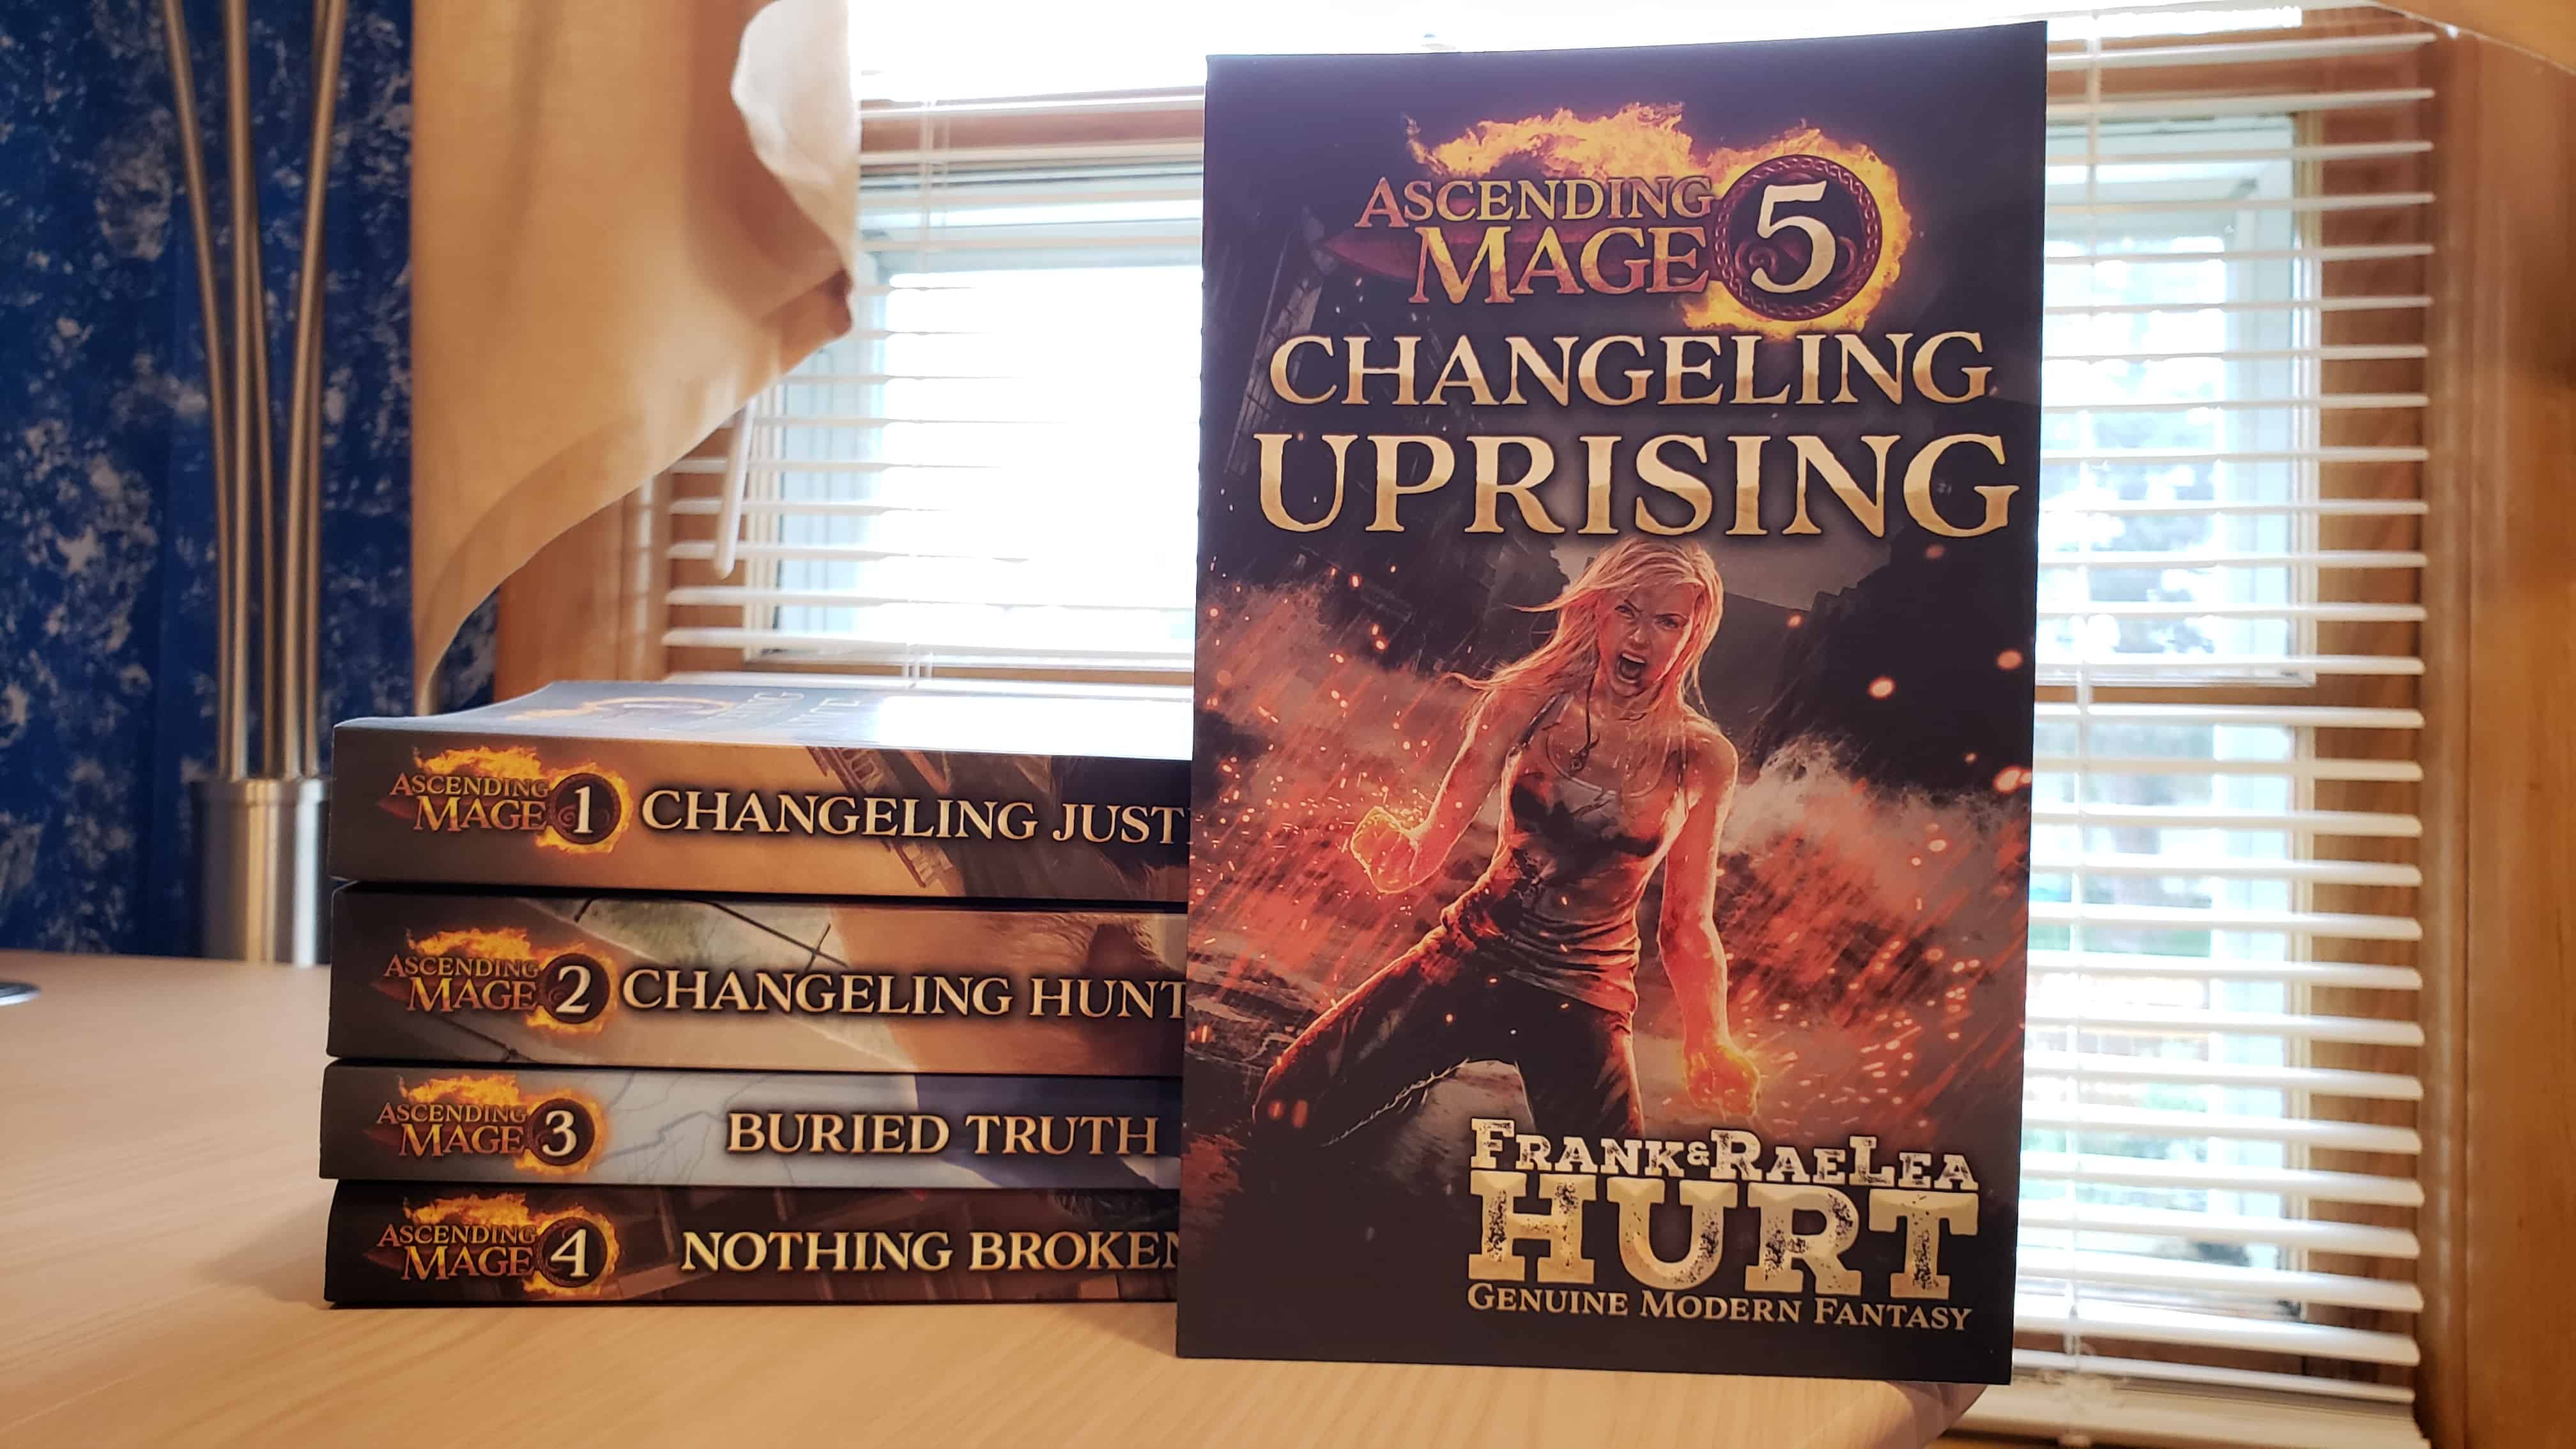 New Release! Ascending Mage 5: Changeling Uprising